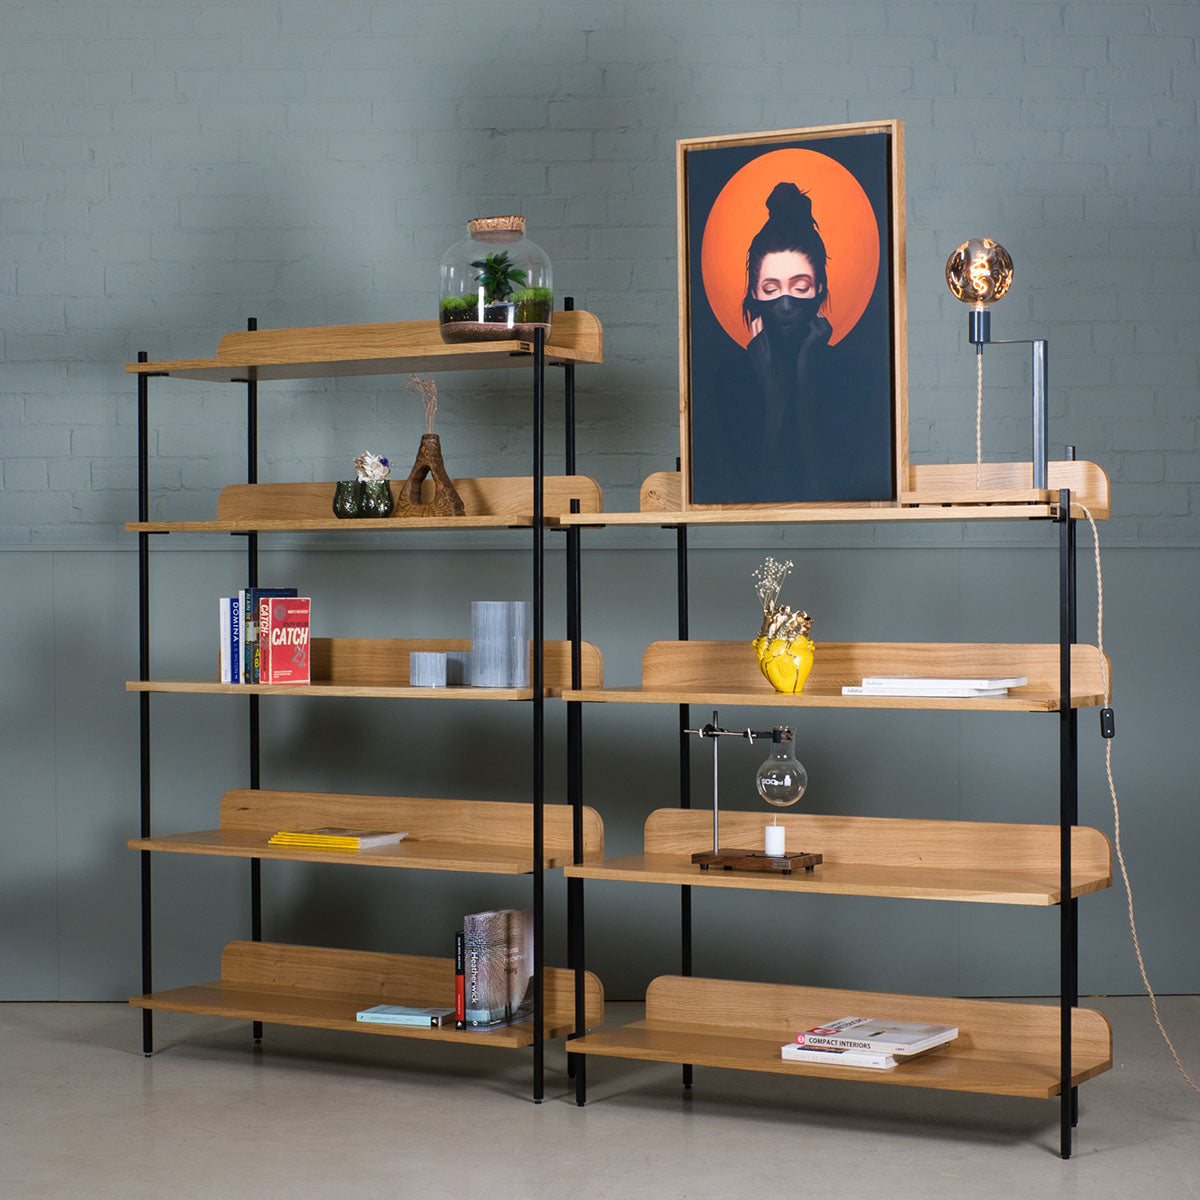 An image of the Oak Bookcase, Sia product available from Koda Studios